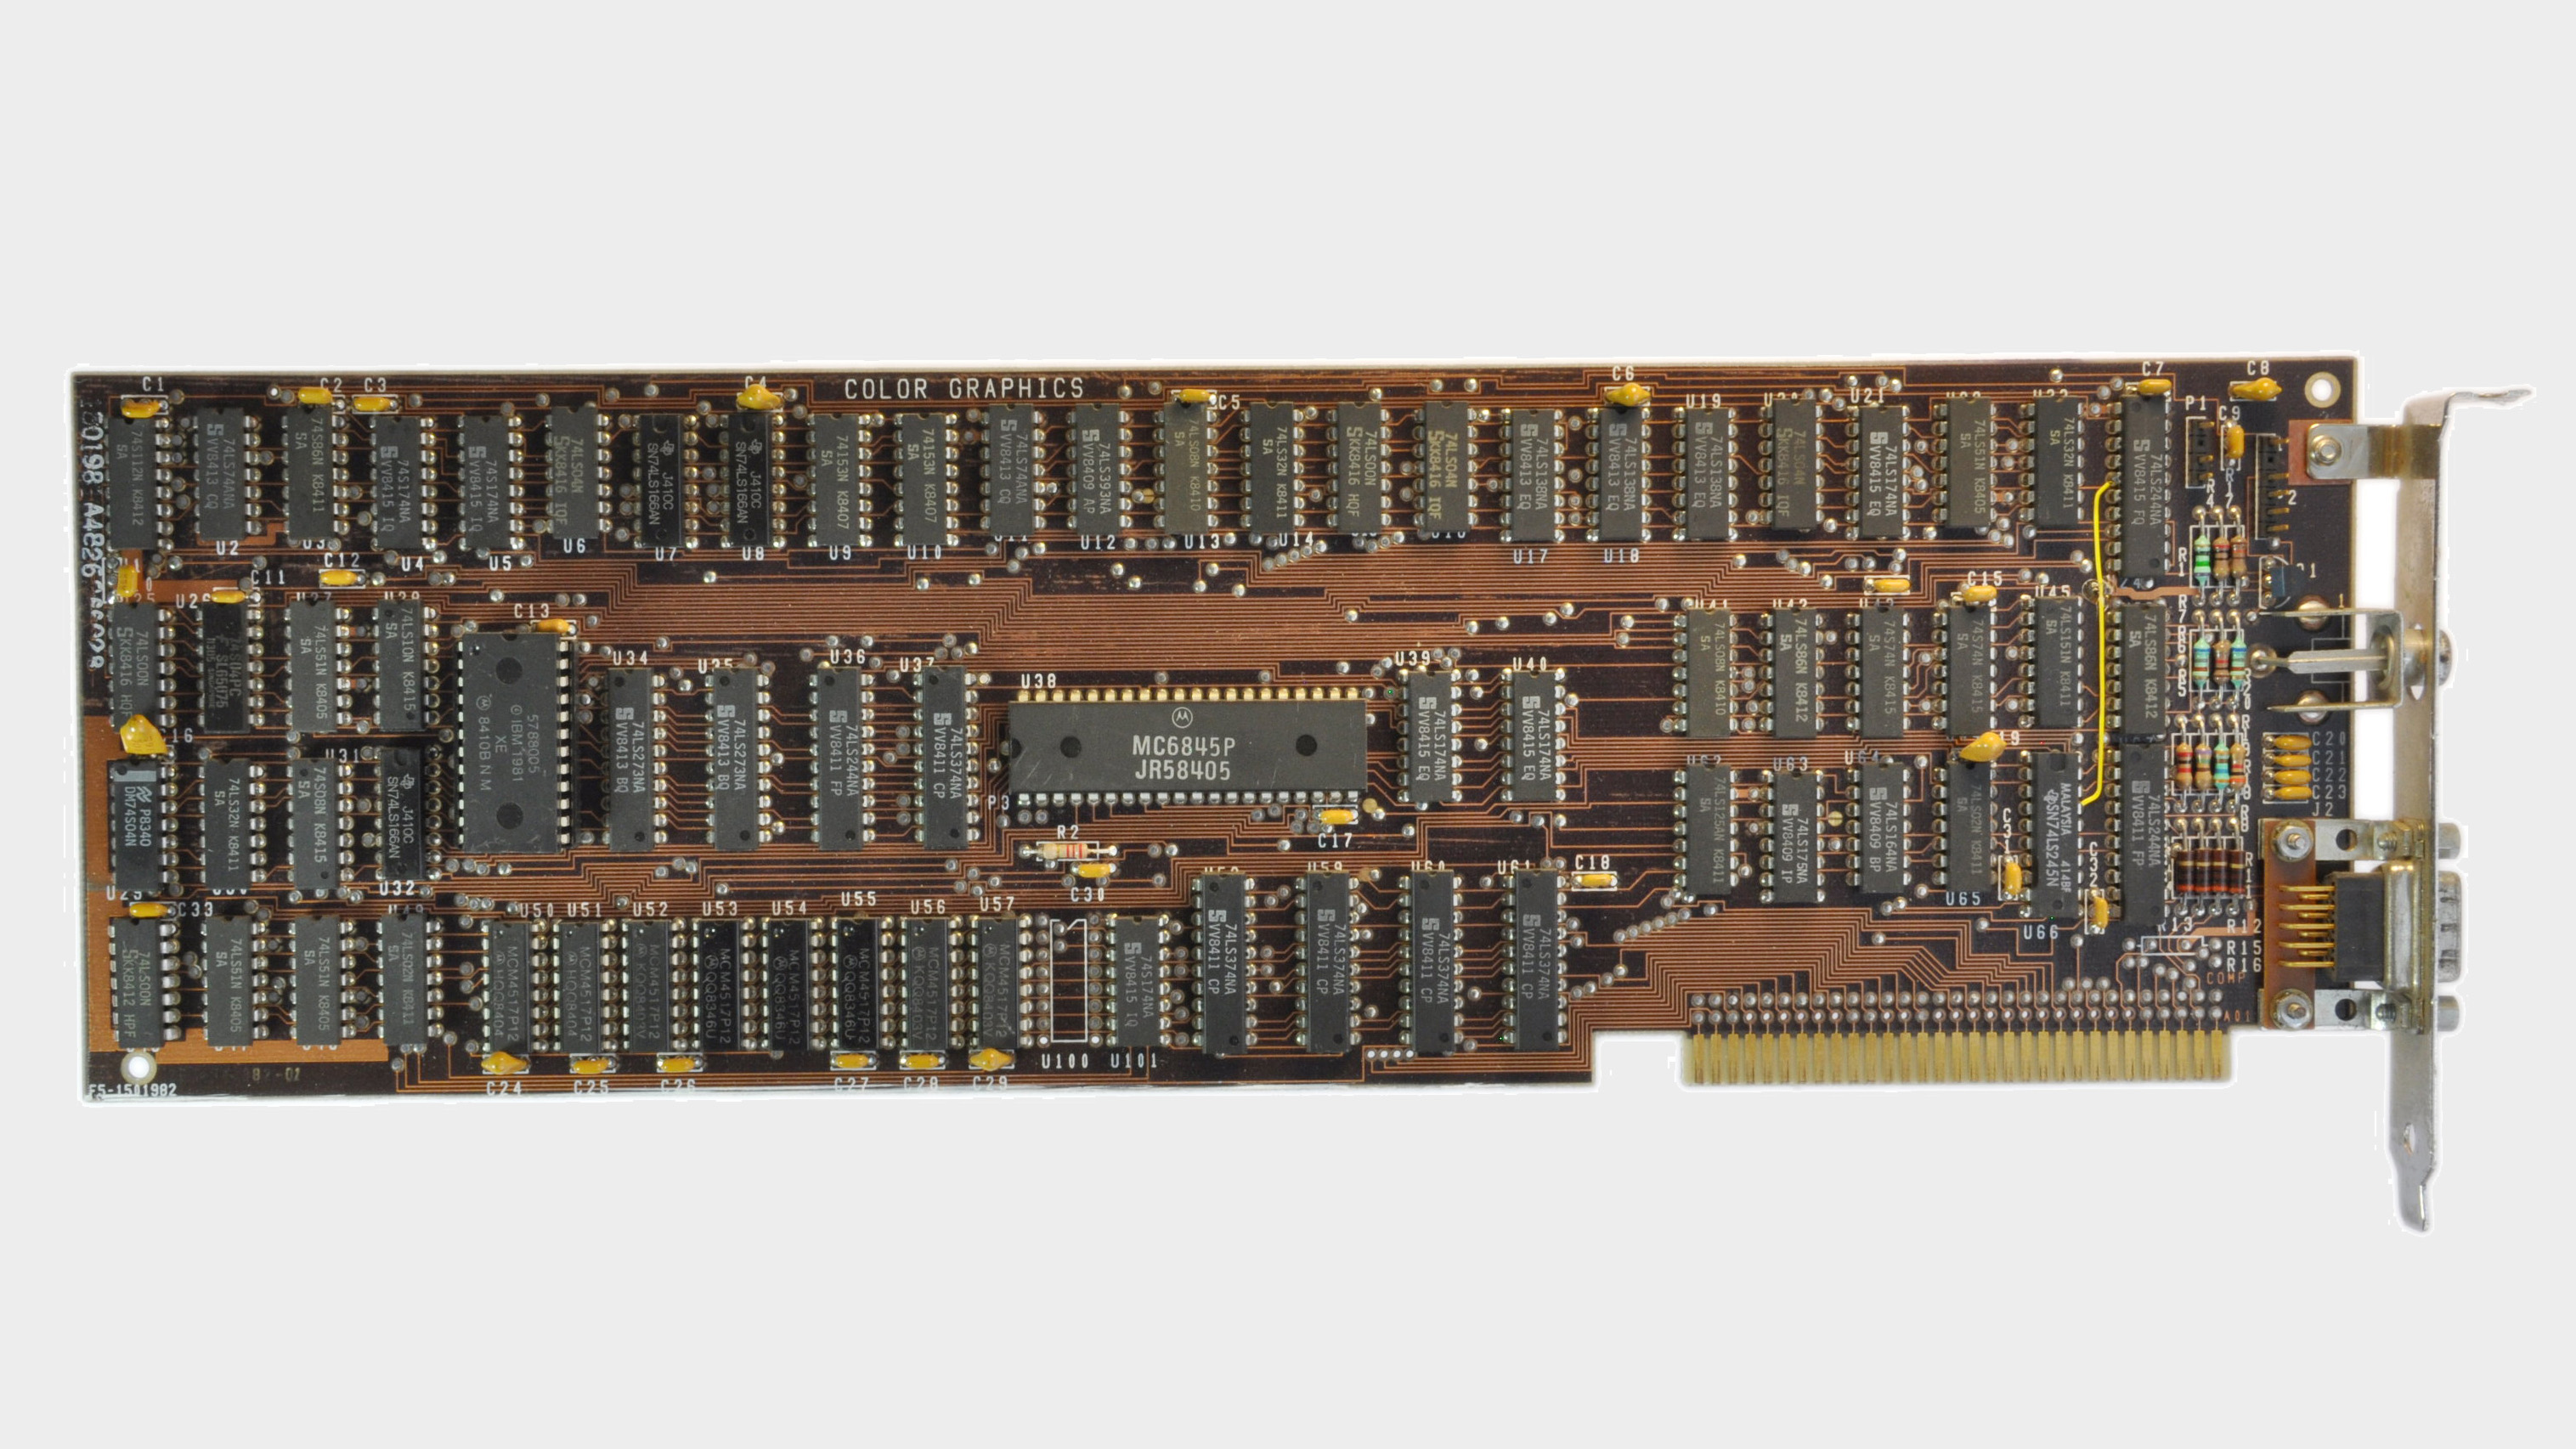 An image of the IBM Color Graphics Adapter with heaps of chips